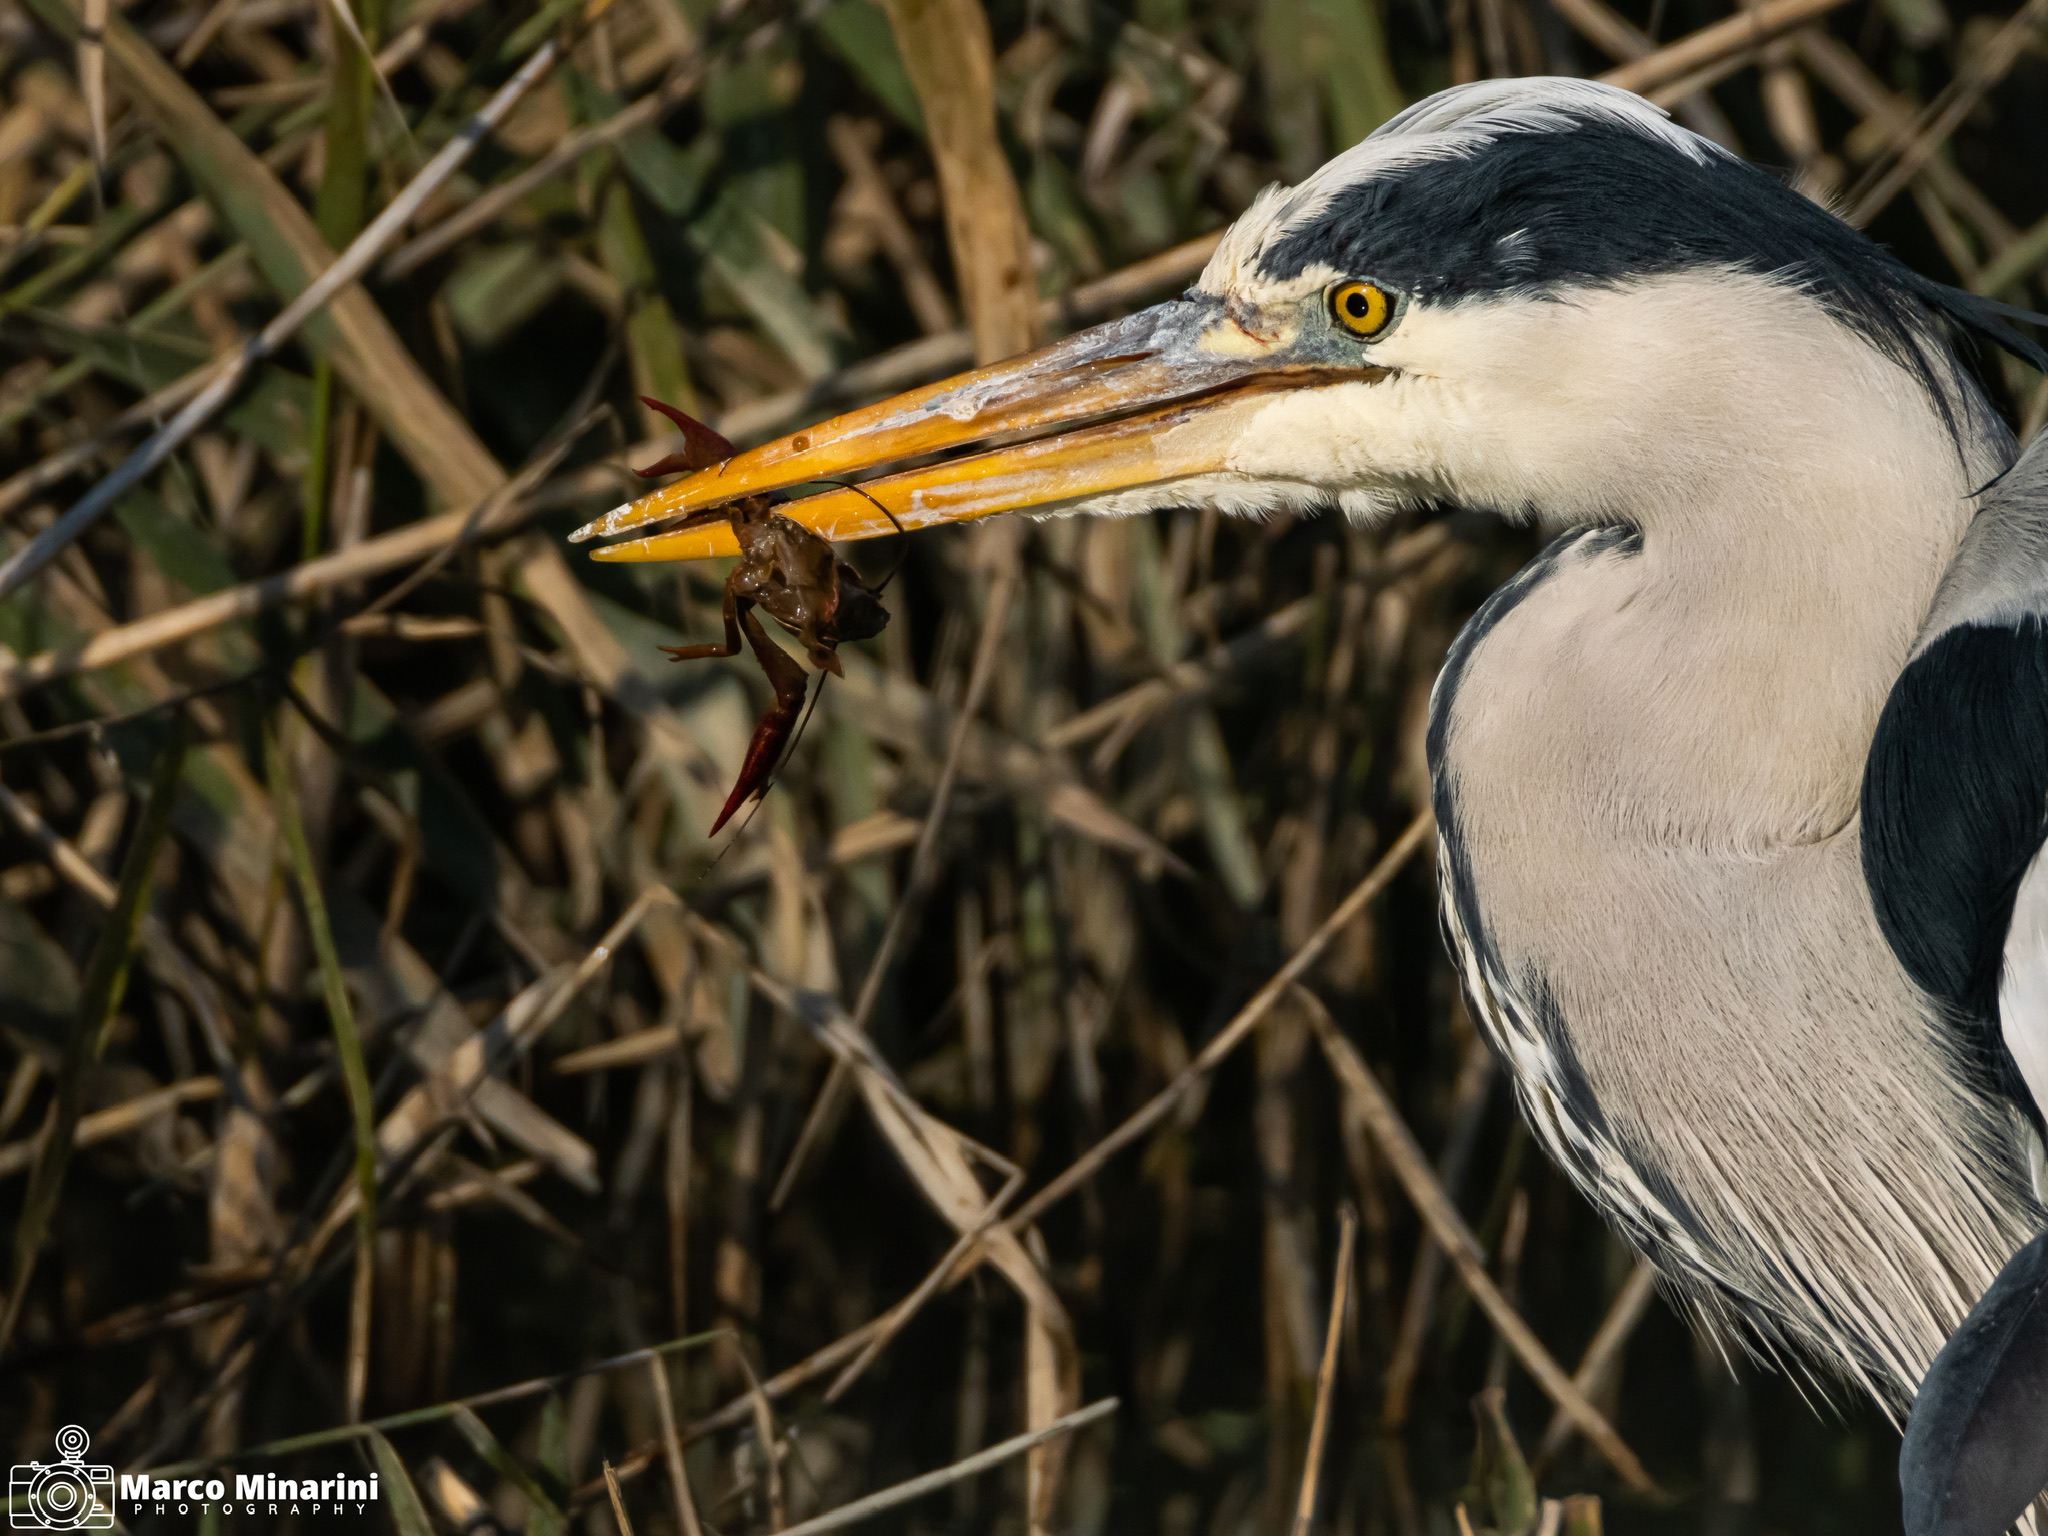 The meal of the heron...